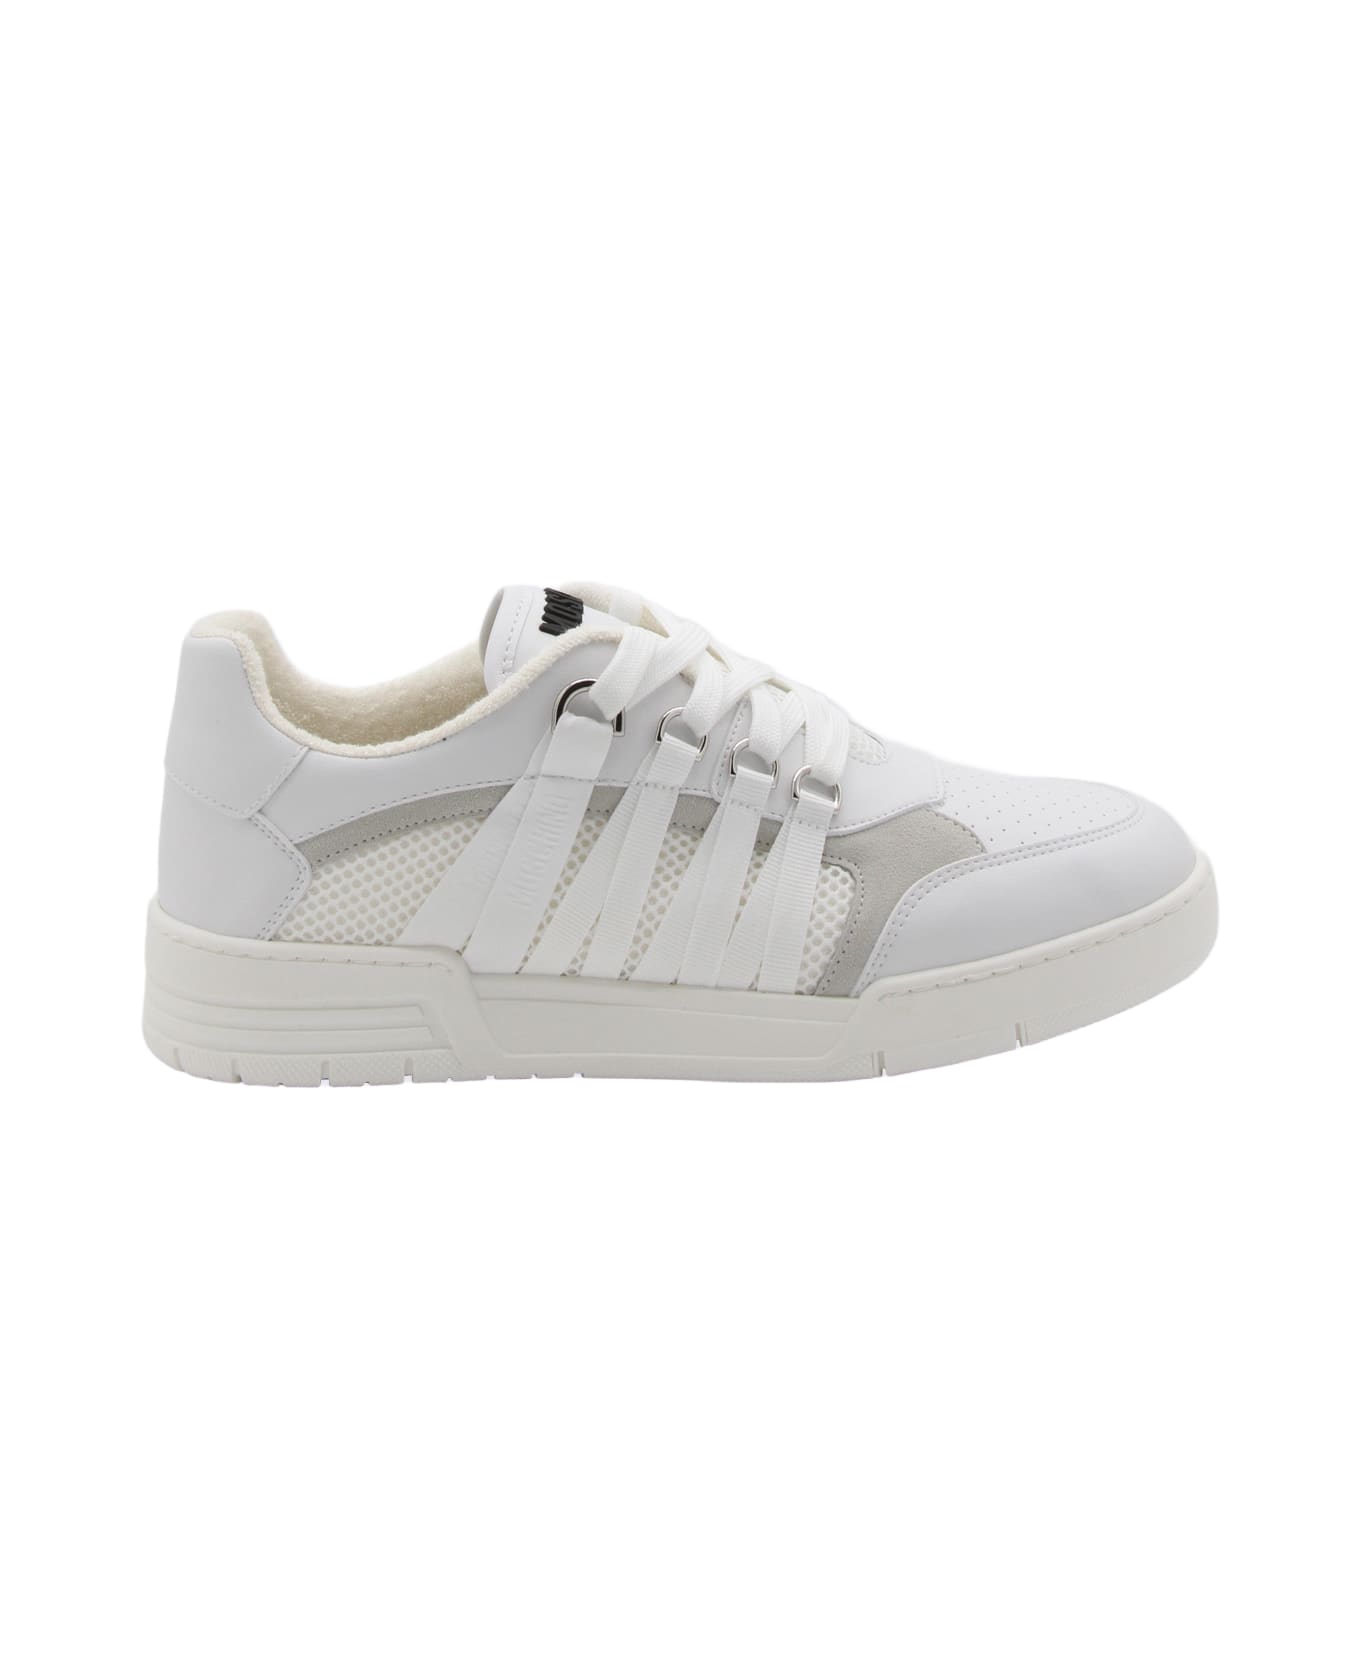 Moschino White Leather Sneakers - White スニーカー